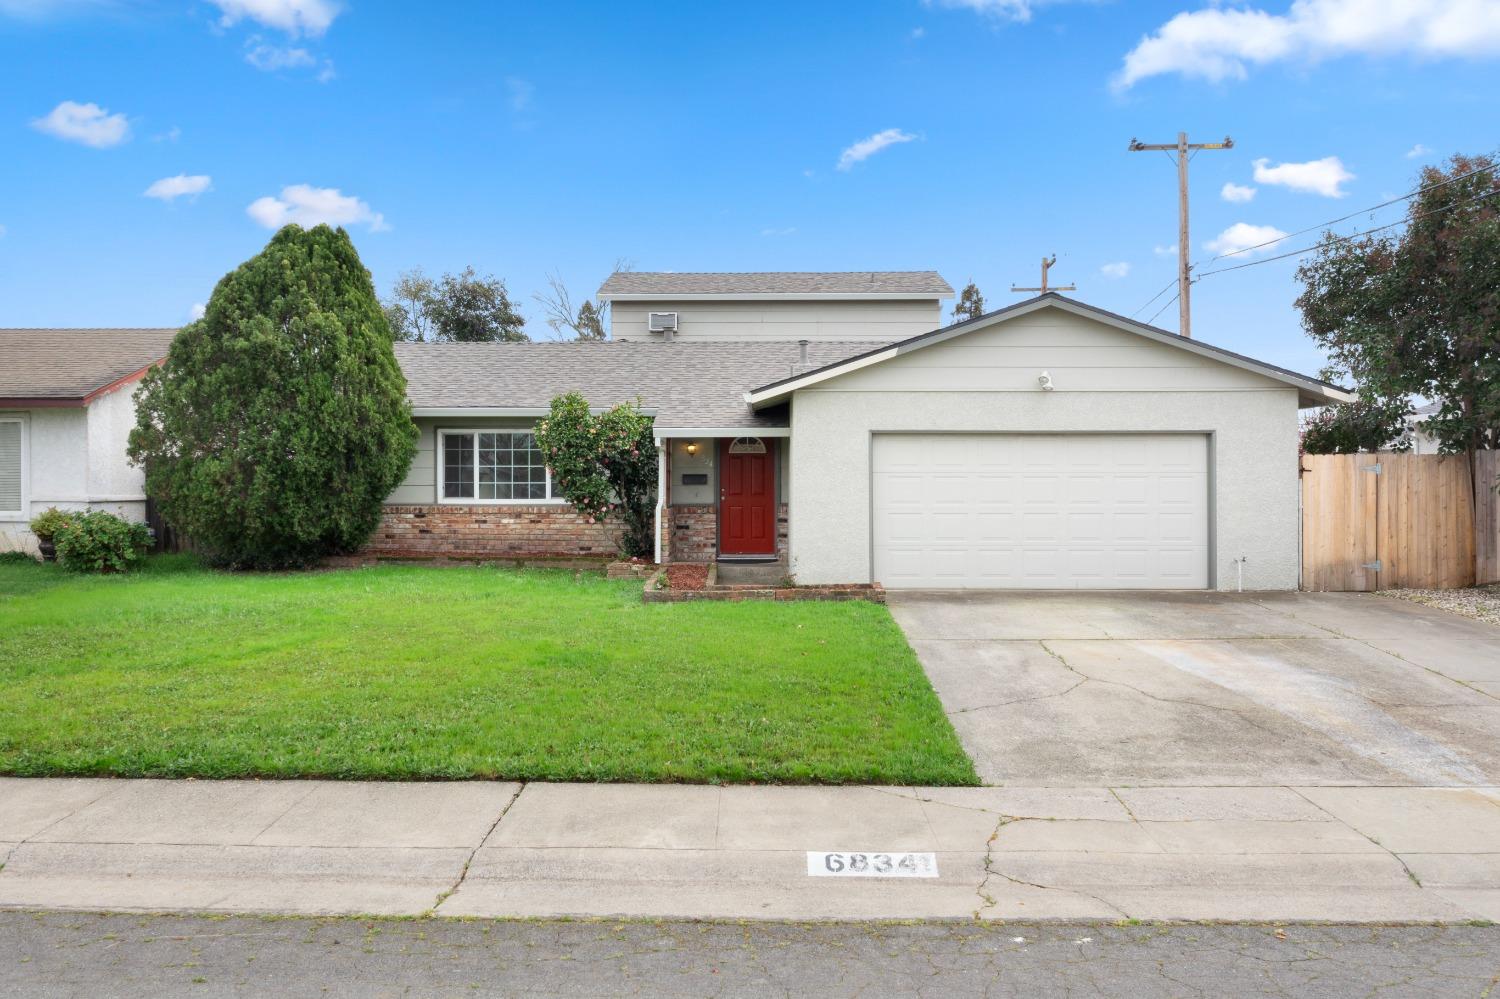 Photo of 6834 Easthaven Wy in Citrus Heights, CA